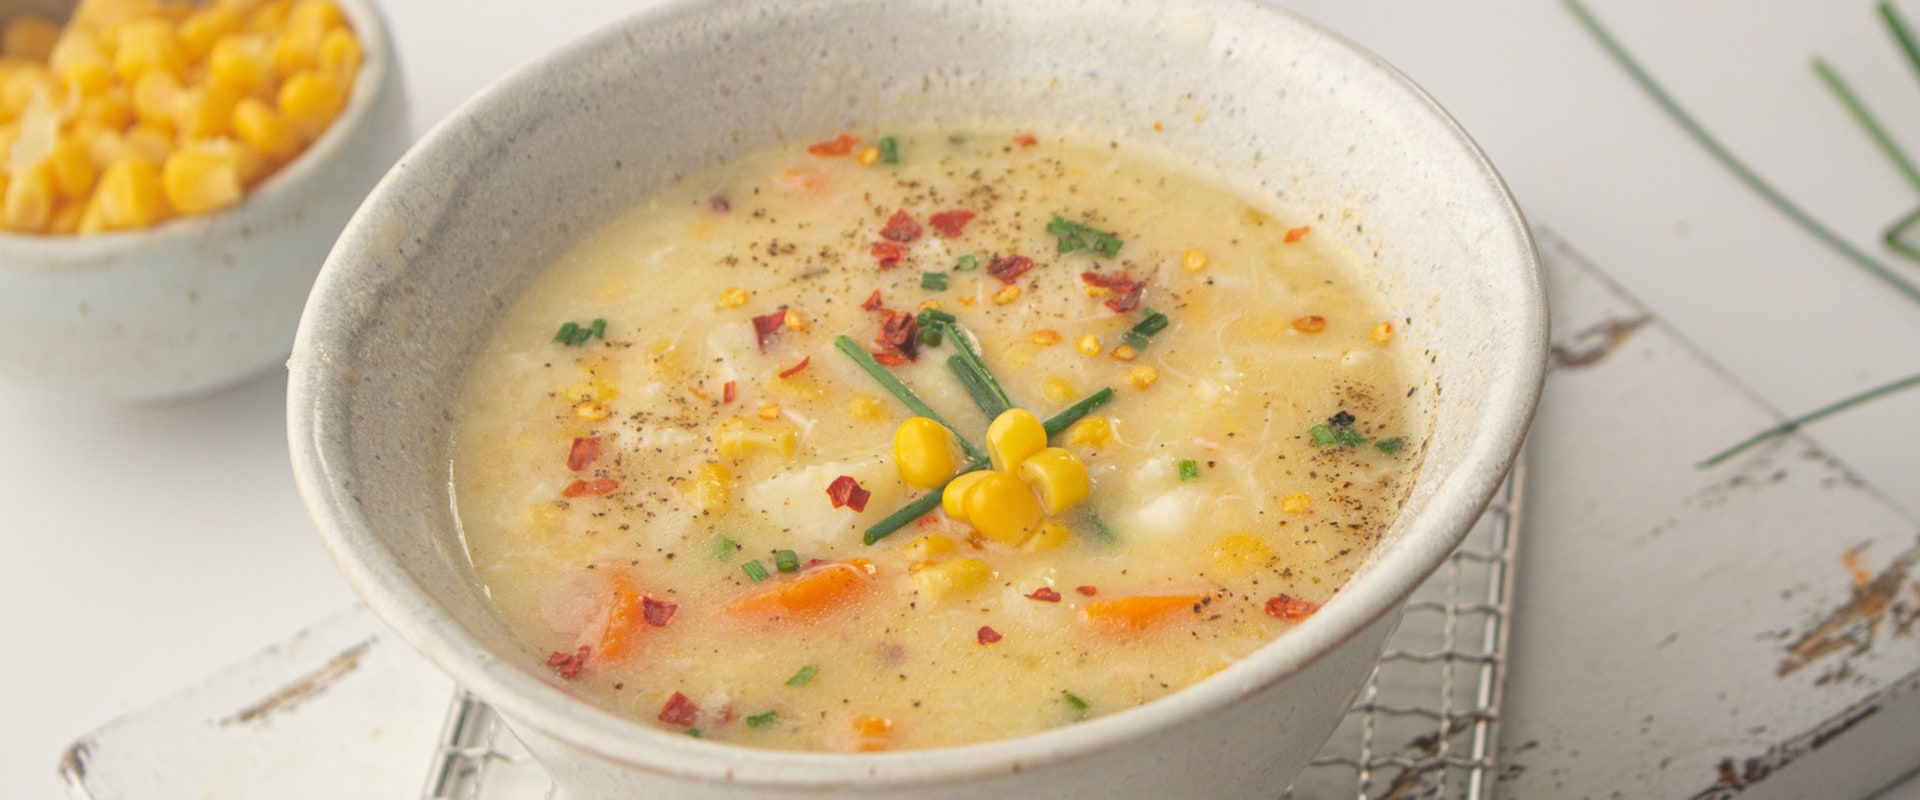 Creamy Dried Scallop and Corn Chowder: A Delicious Twist on a Classic Chinese Dish